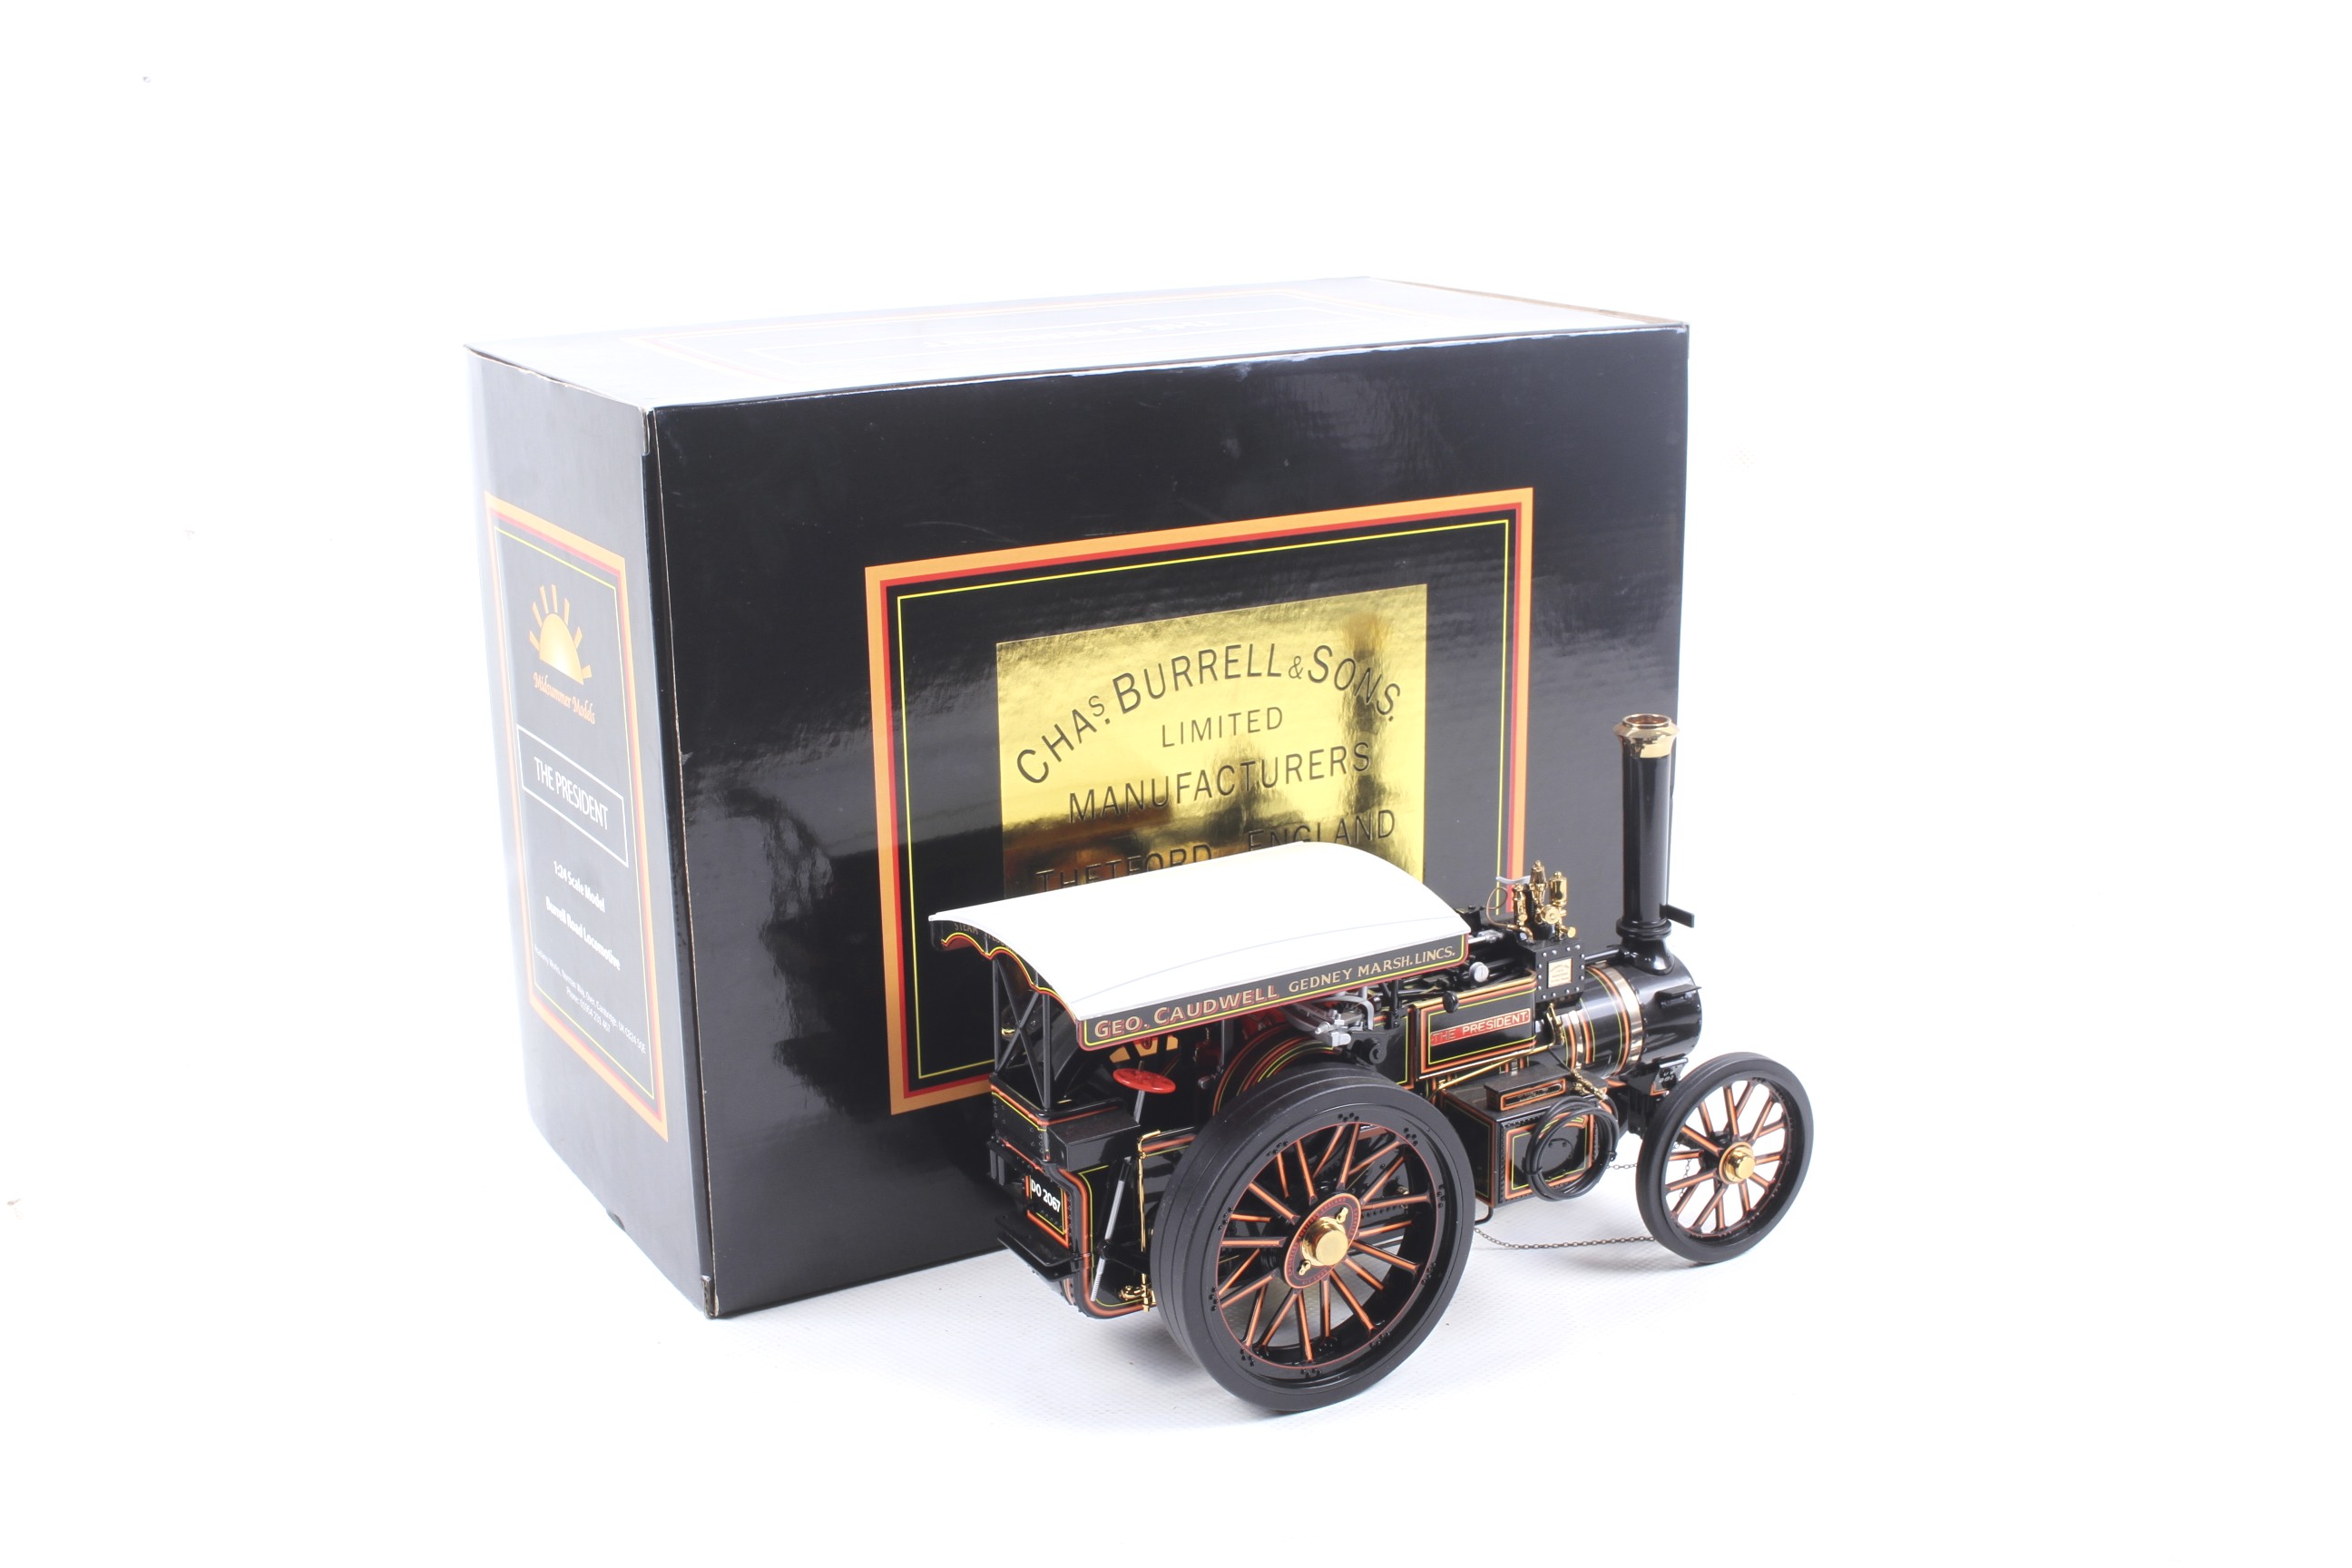 A Midsummer Models 'The President' 1:24 scale burrell road locomotive. - Image 2 of 2